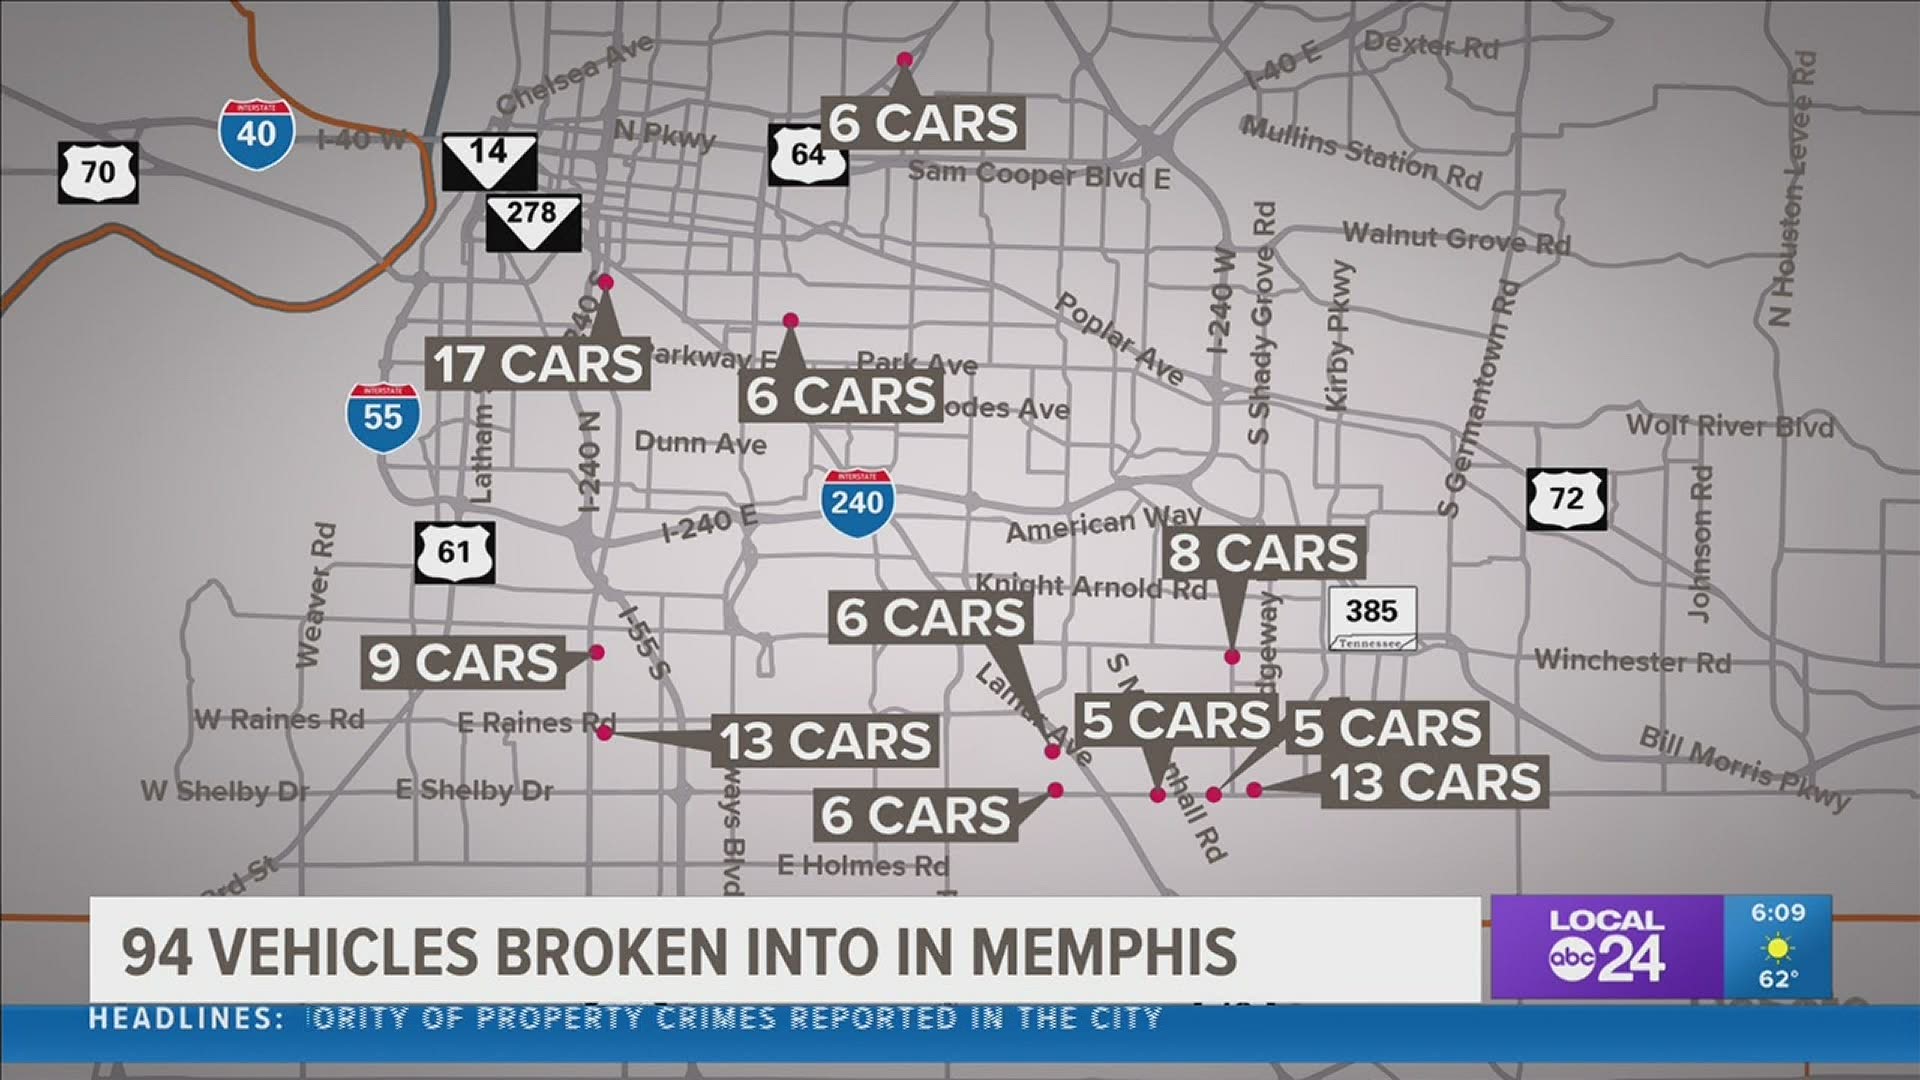 Memphis Police said nearly 100 vehicles were broken into or vandalized overnight and early Wednesday morning at businesses and hotels across Memphis.